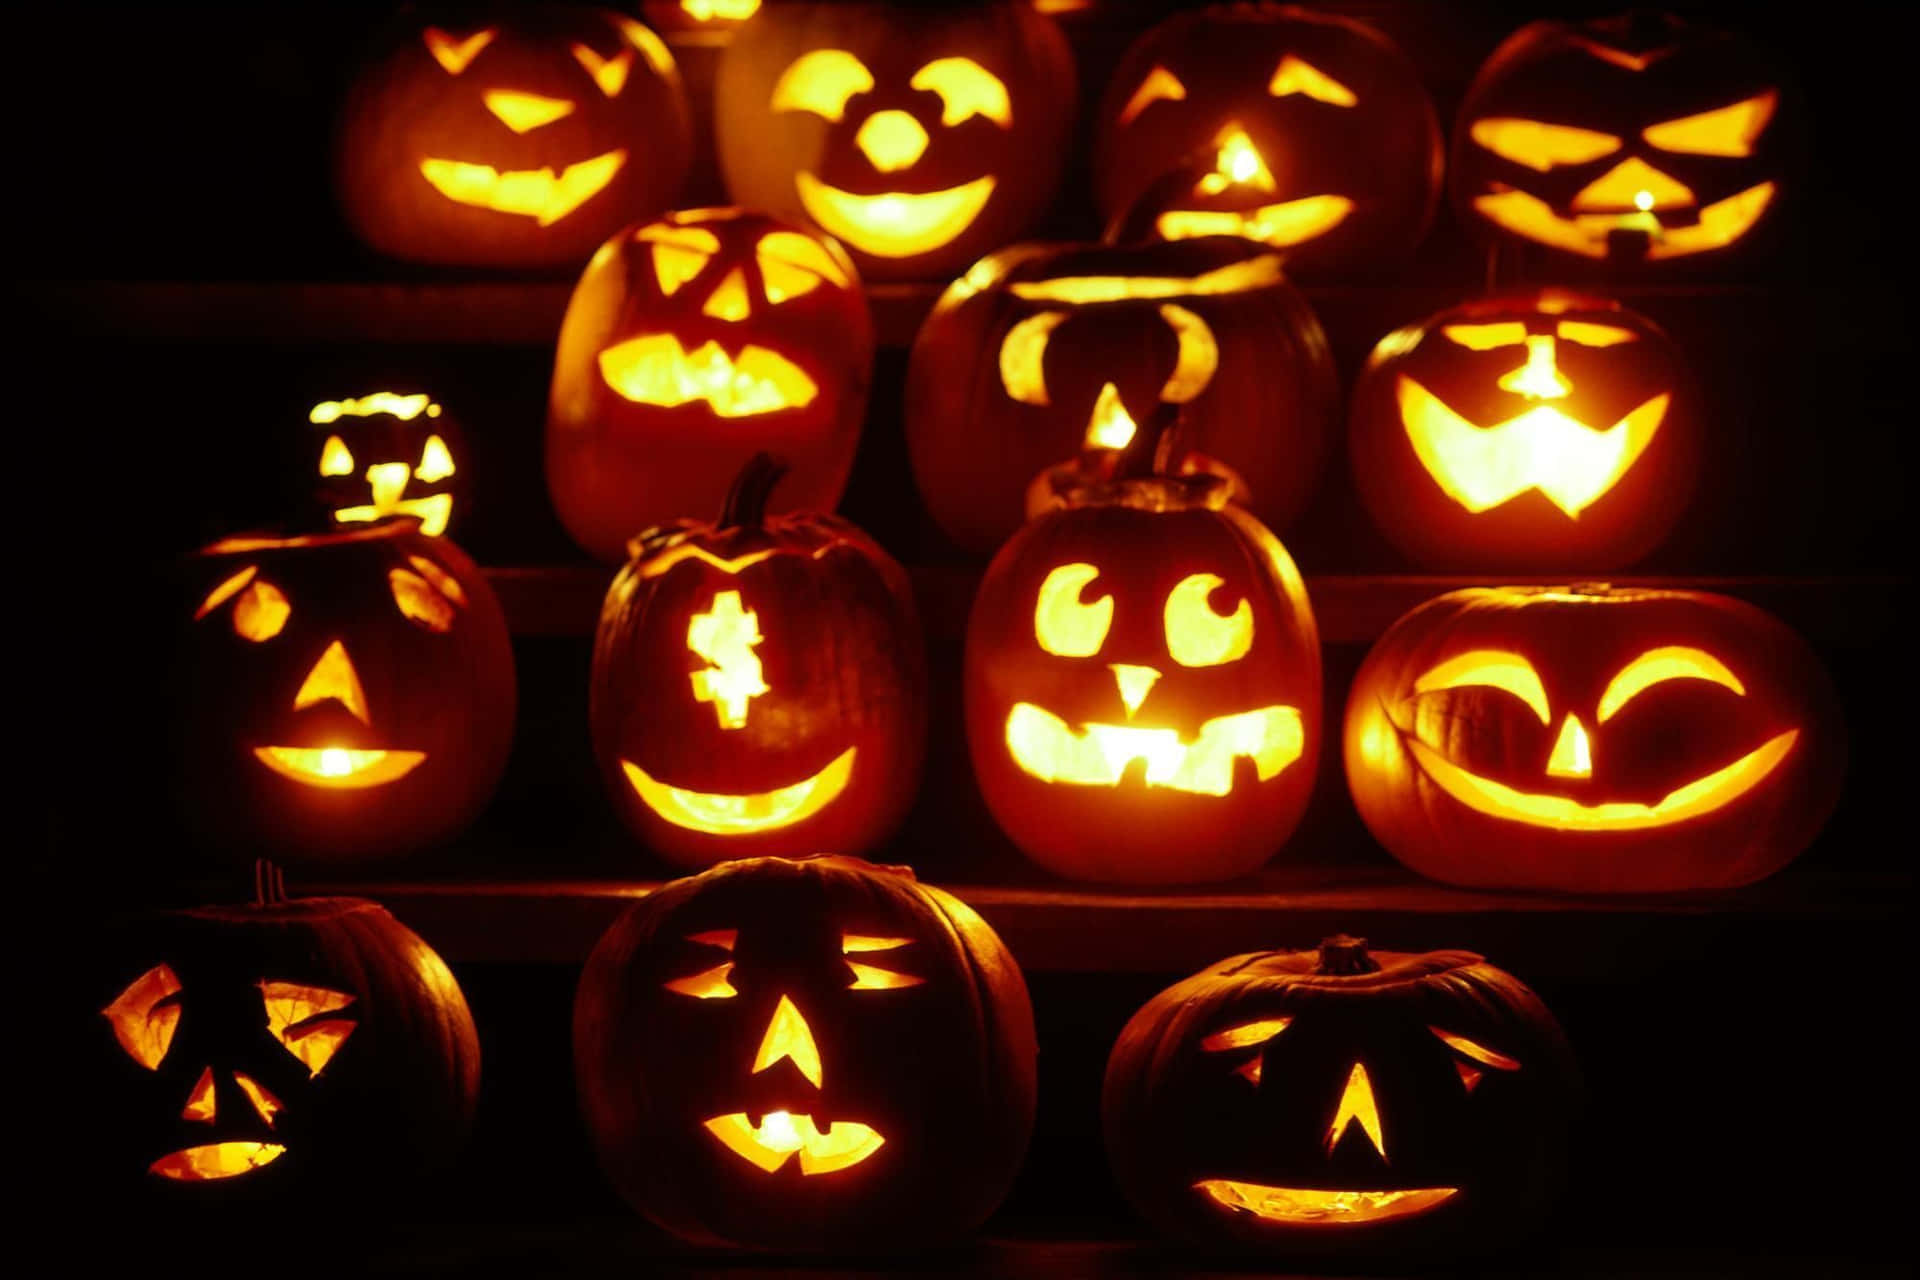 Carved Pumpkin Various Expressions Wallpaper